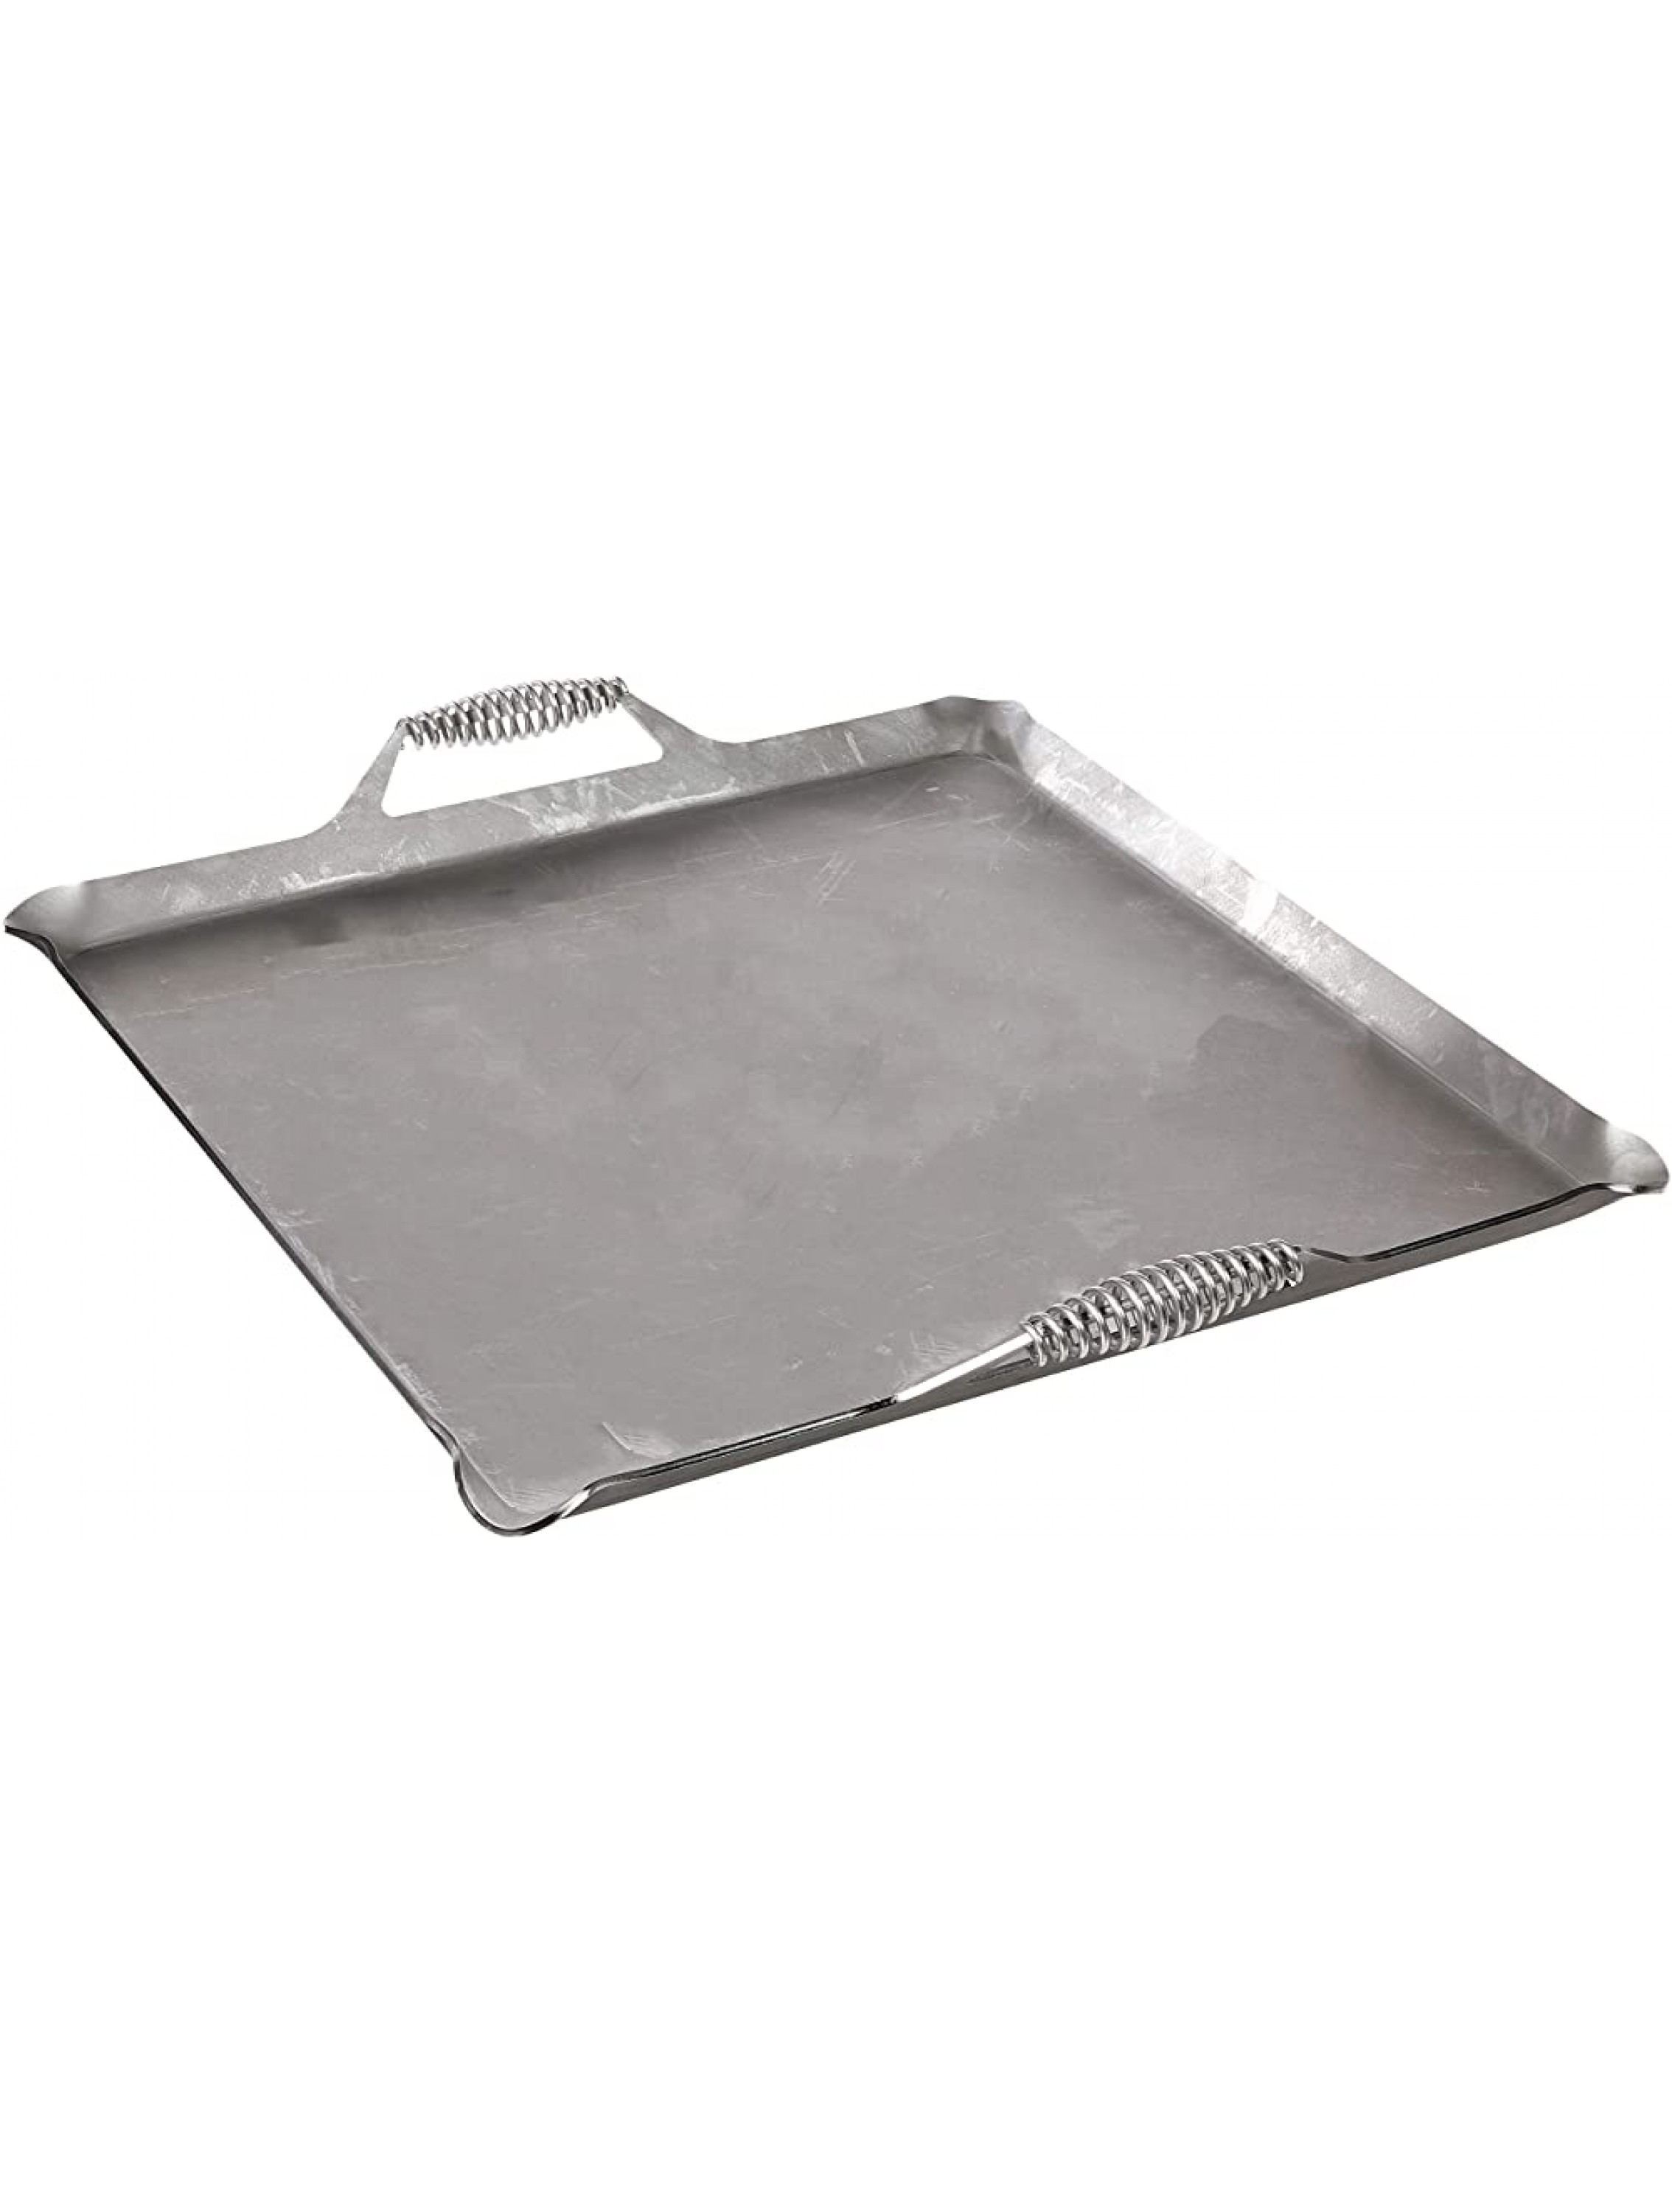 Rocky Mountain Cookware Master Chef 7 Gauge Steel Griddle 24 x 24 Metal - BL95PUJ0S